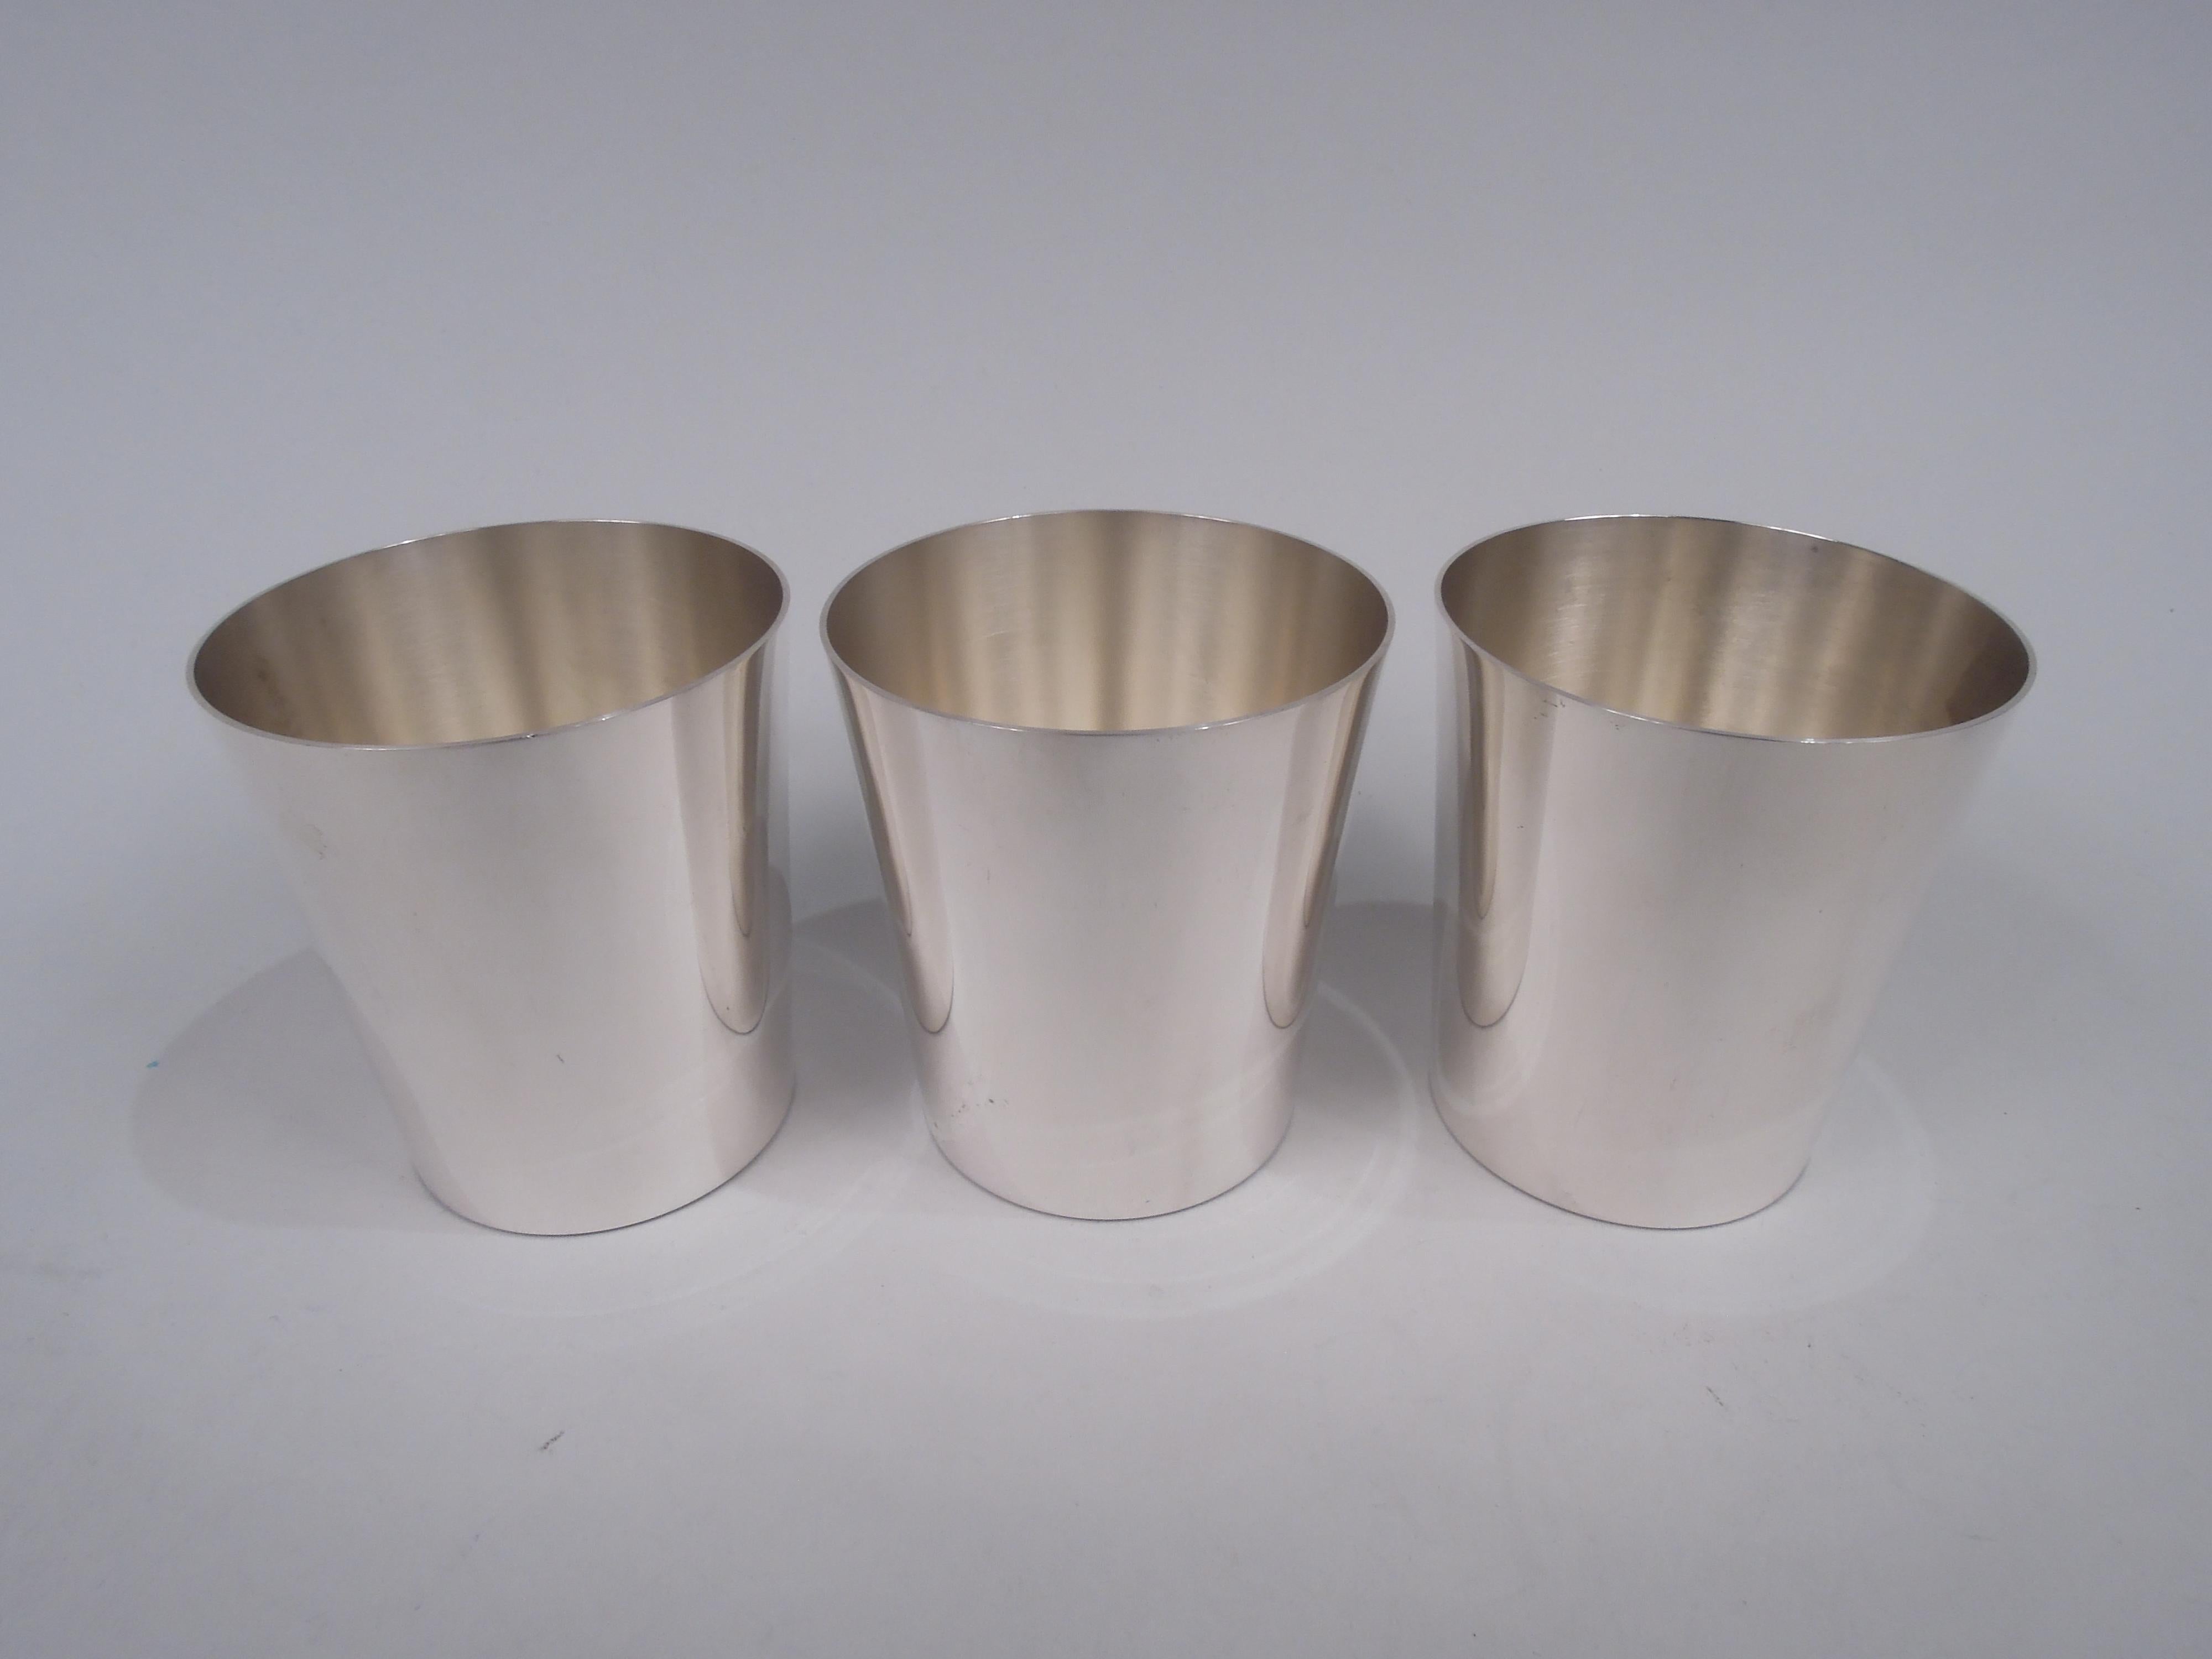 Set of 3 Midcentury Modern sterling silver tumblers. Made by Stieff in Baltimore. Each: Straight and tapering sides. Spare form and easy-grip proportions. Fully marked including maker’s stamp and no. 0707/2. Total weight: 11.7 troy ounces. 